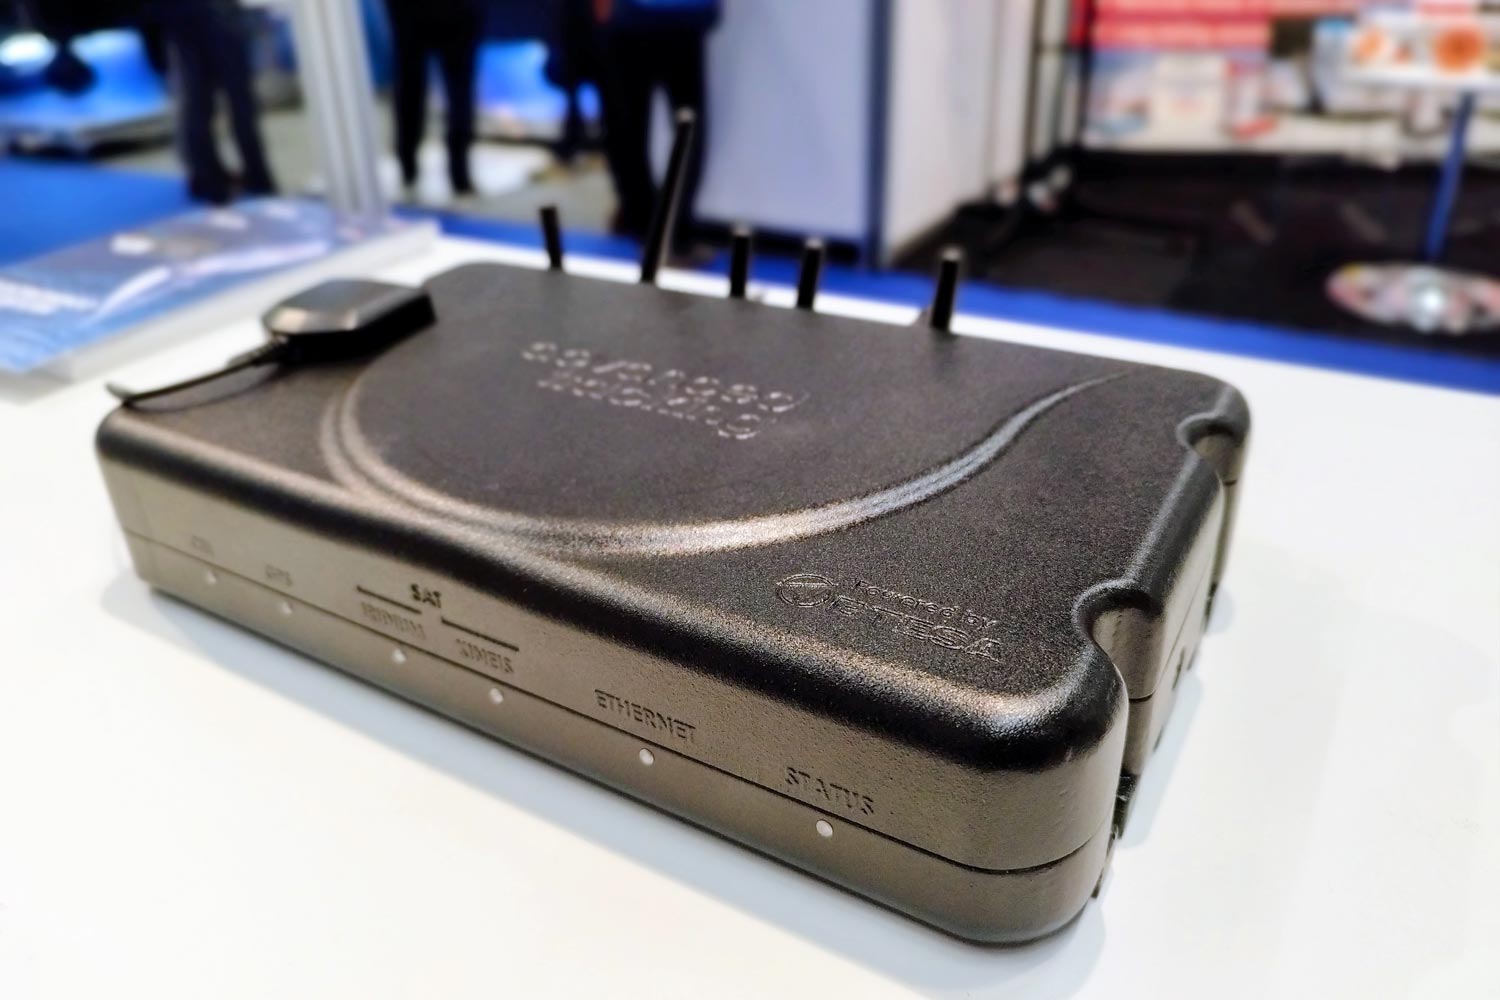 Advanced Tracking presents its SmartConnect Gateway at CES in Las Vegas